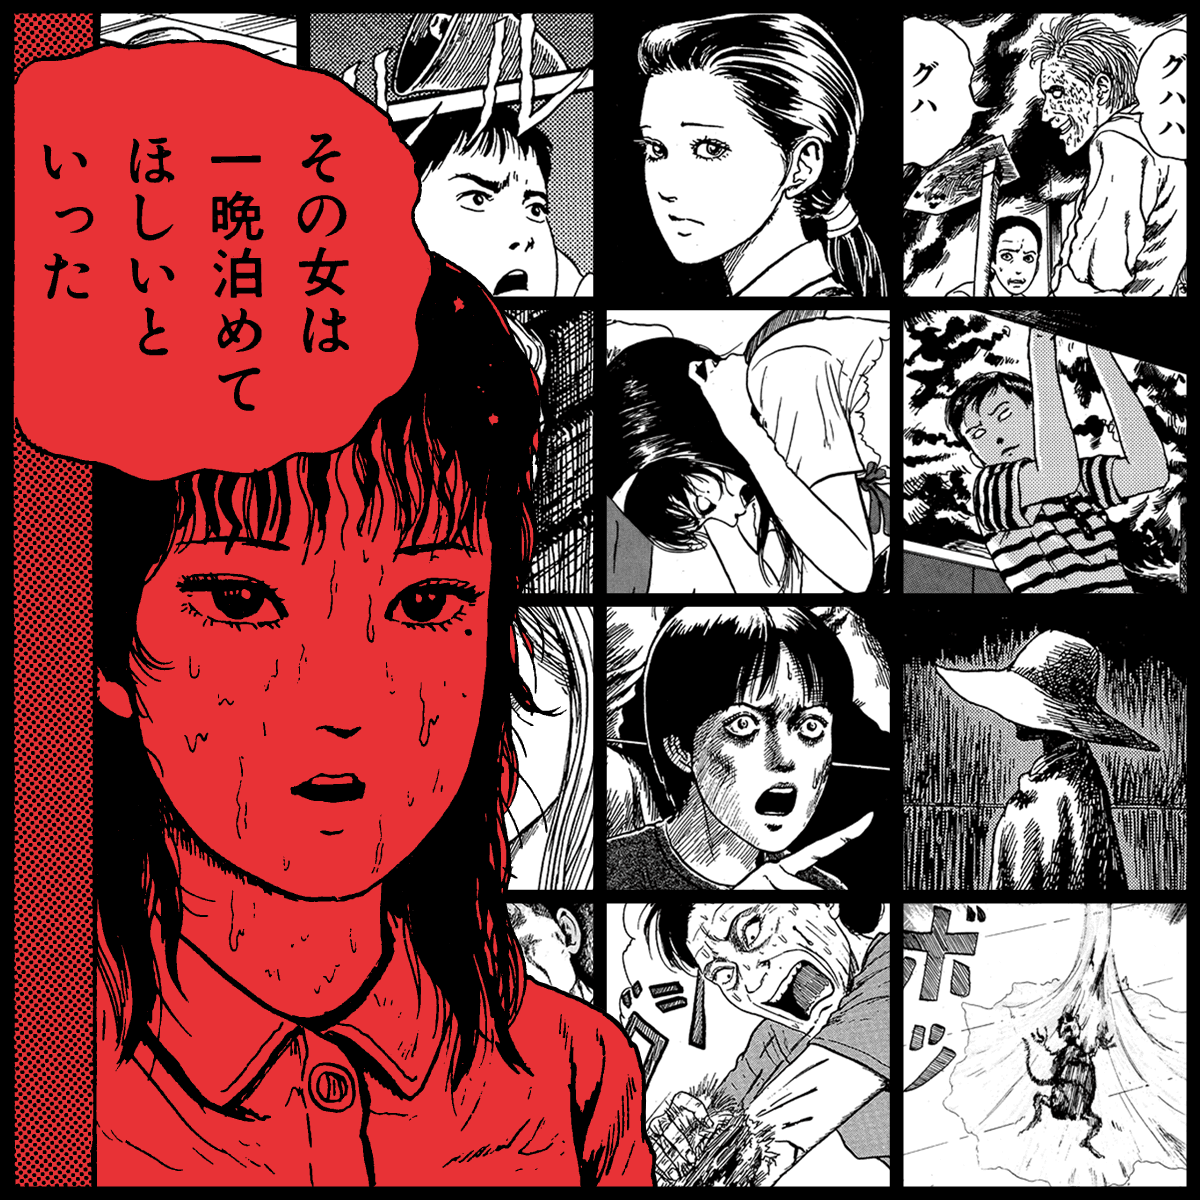 TOMIE by Junji Ito #355